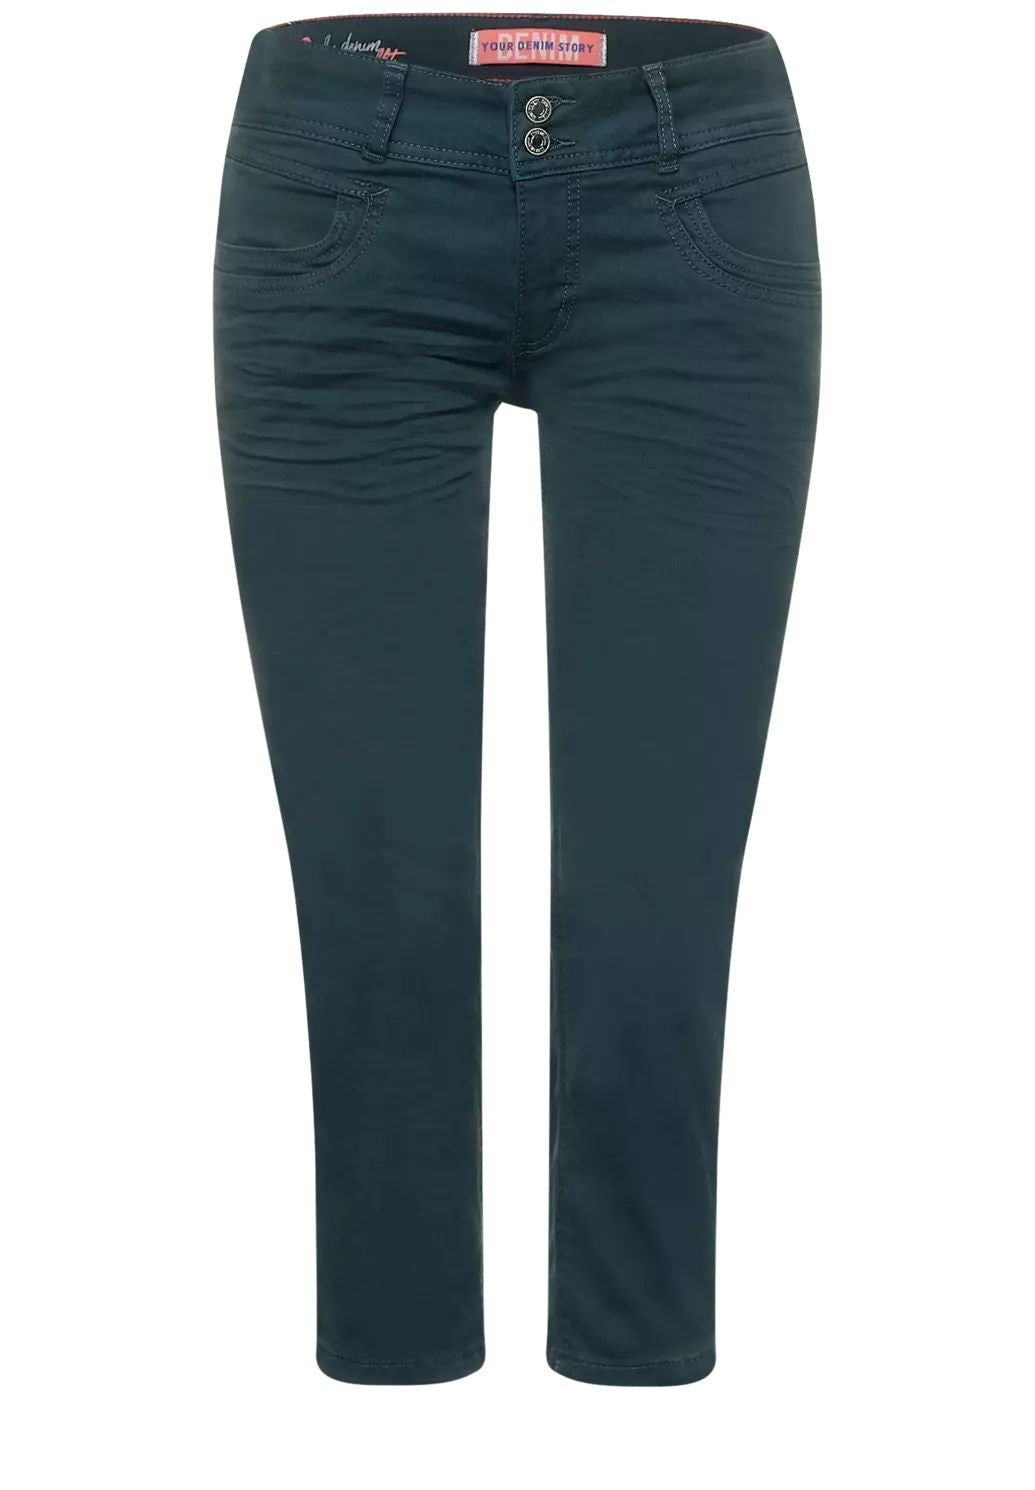 Street One - Casual Fit 3/4 Jeans - 375242